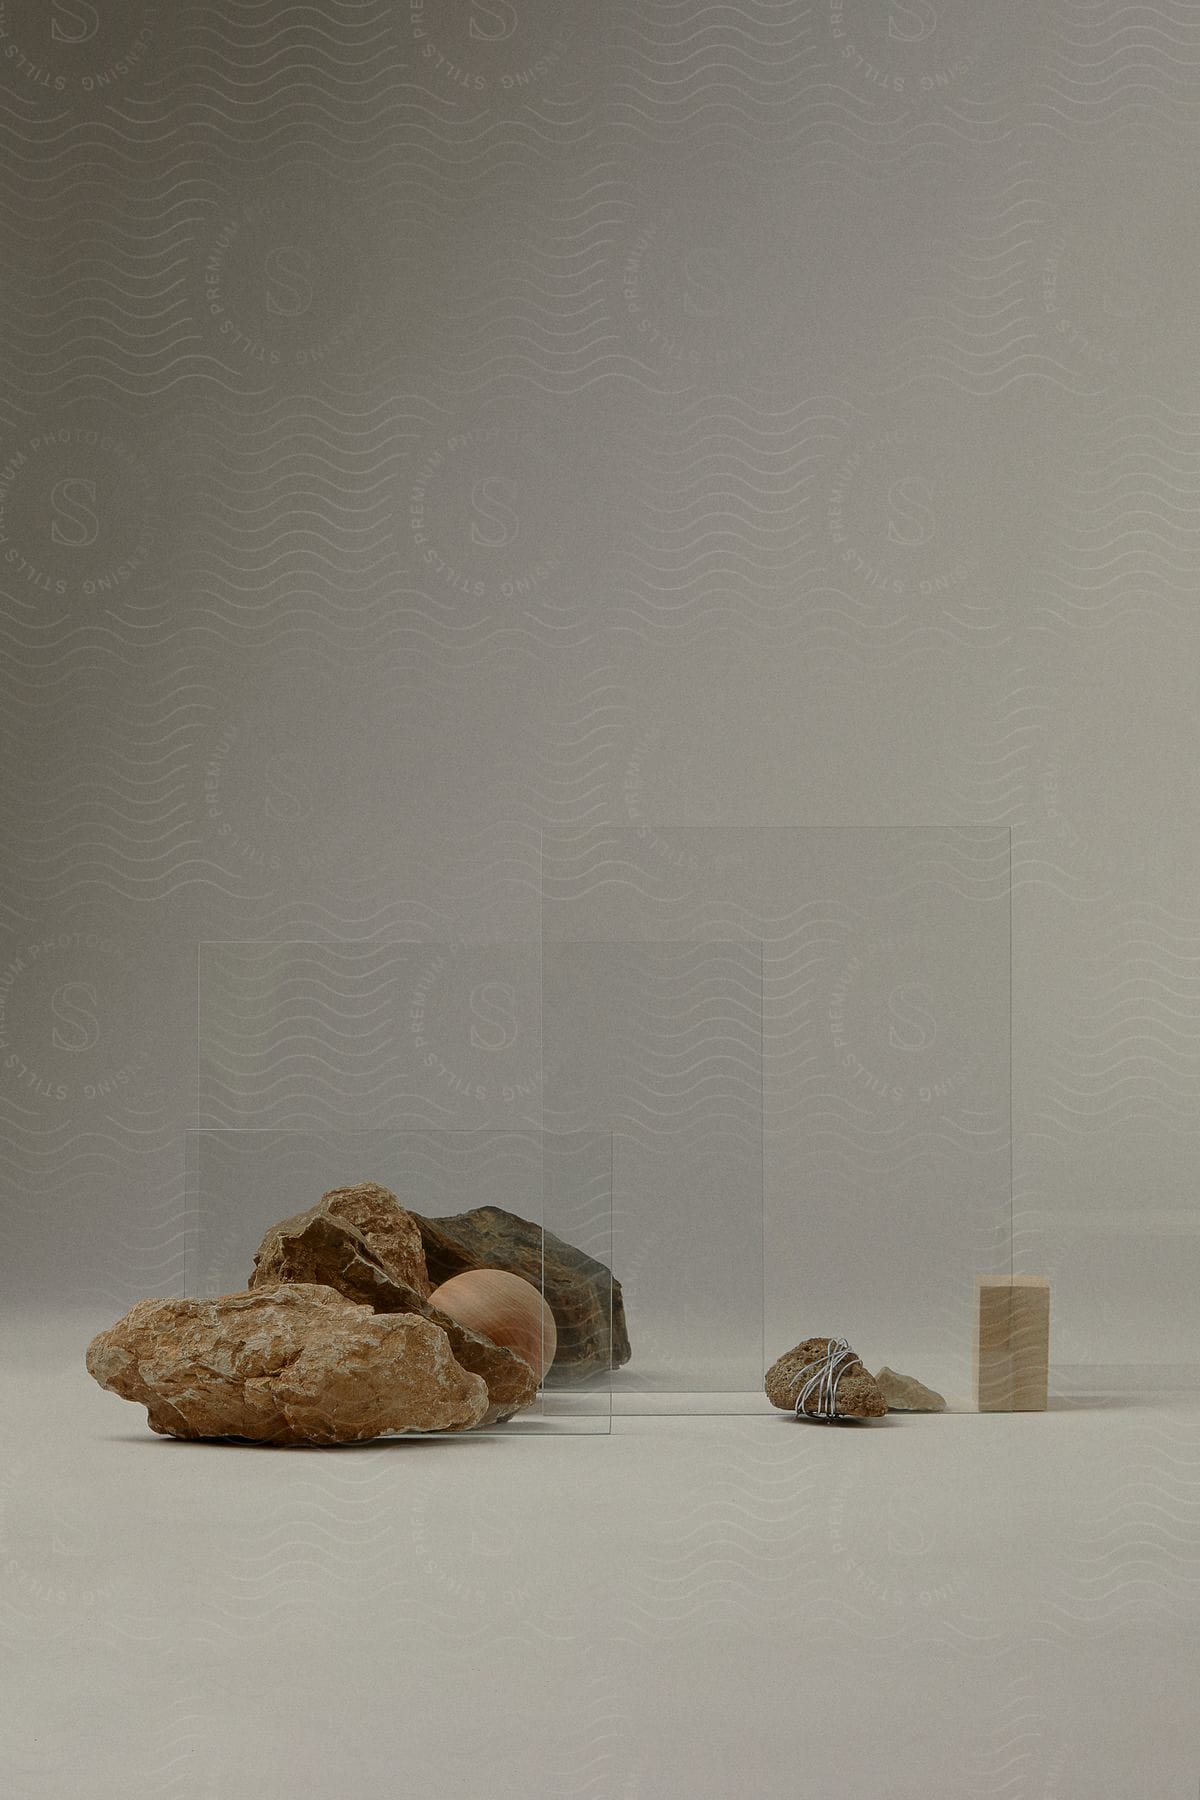 Grouping of rocks and wooden block arranged as still life